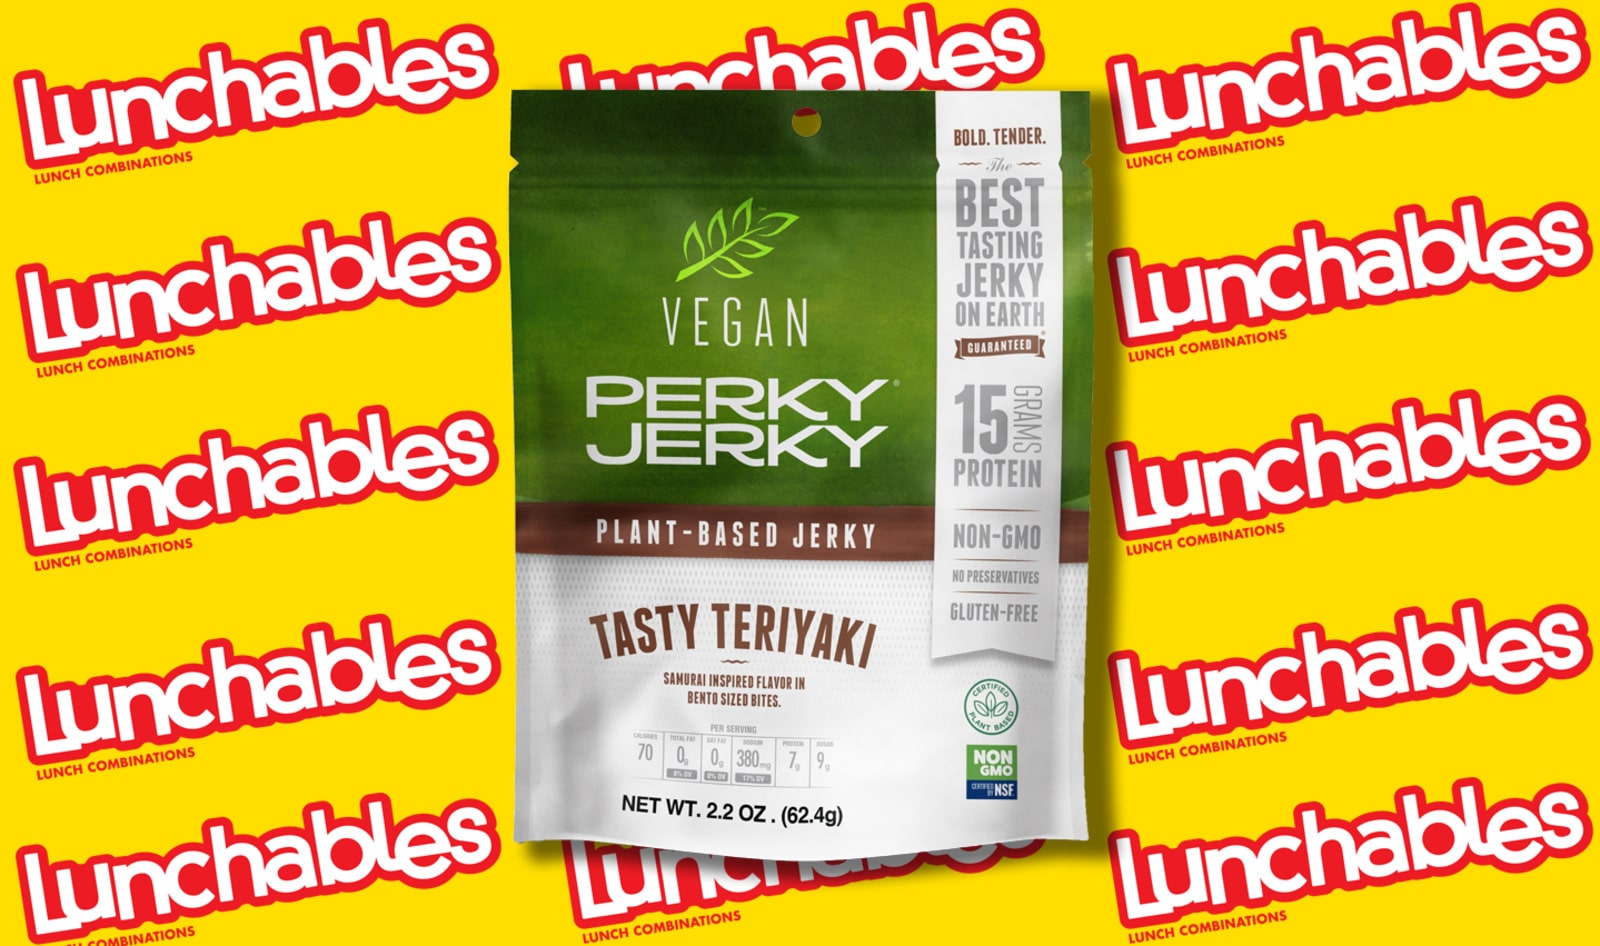 Lunchables Inventor Helps Meat Company Launch Vegan Jerky Line